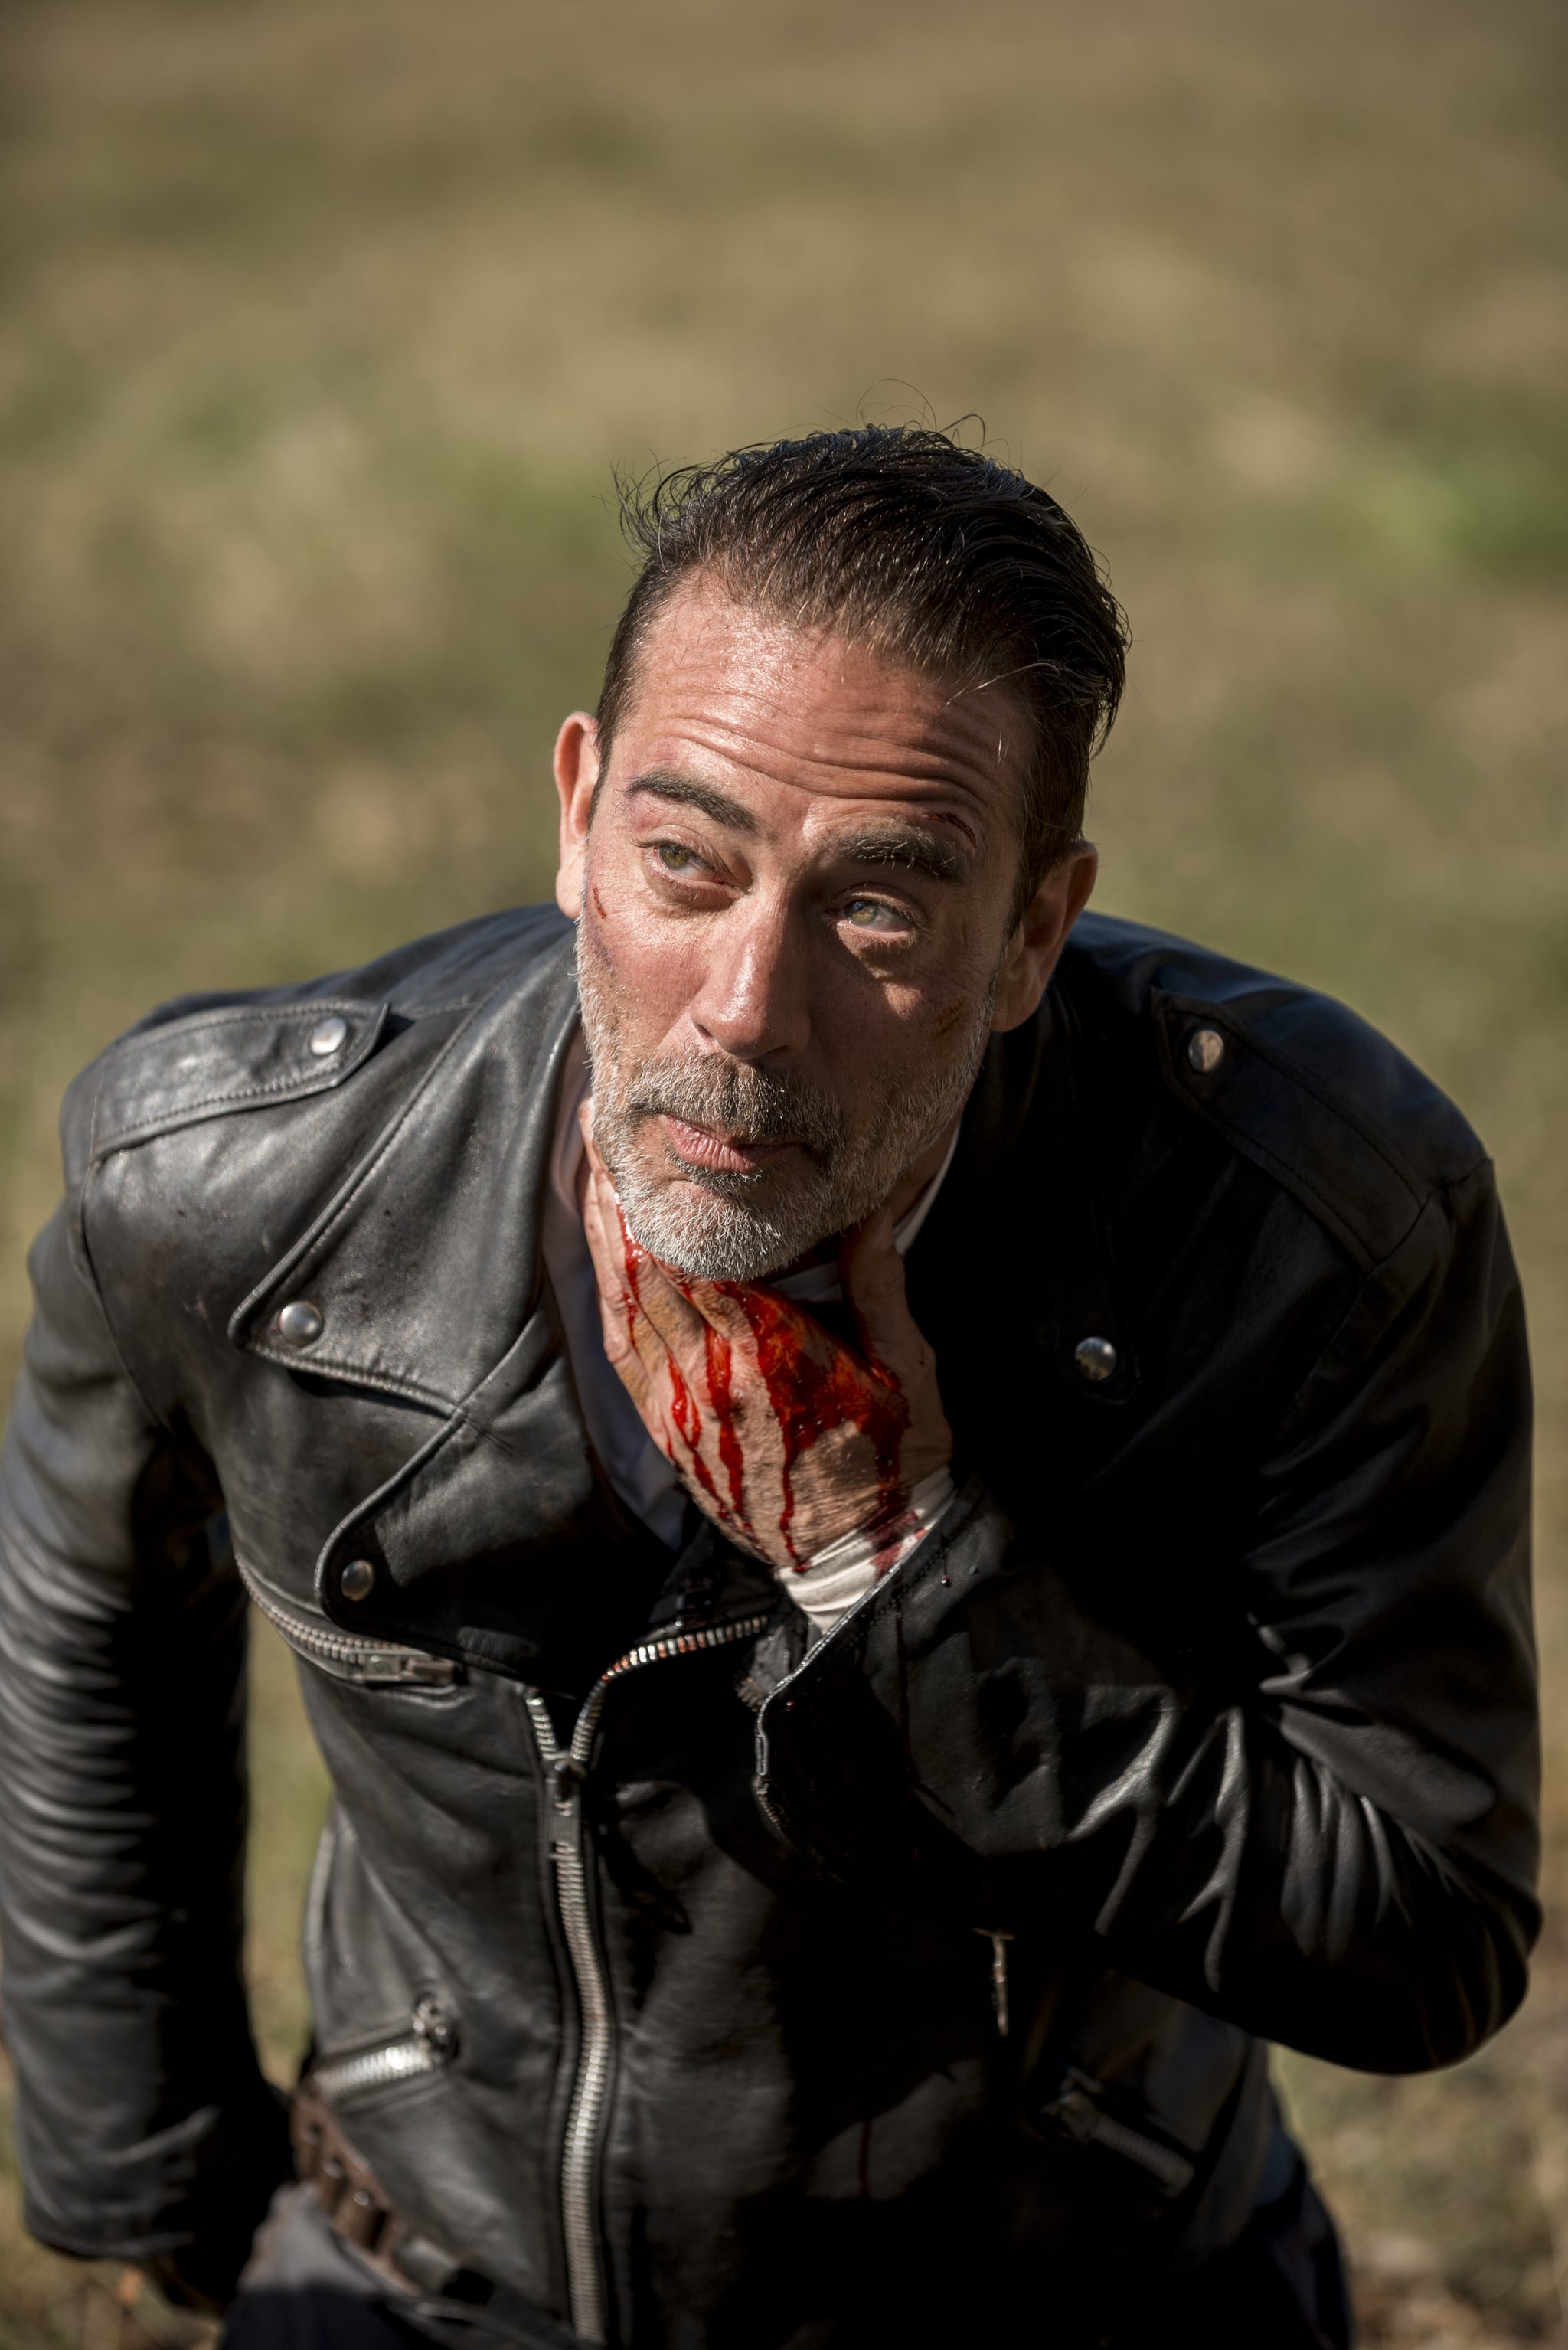 Negan From The Walking Dead | Still Haven't Decided on a Halloween Costume?  Check Out These 42 Last-Minute Ideas | POPSUGAR Entertainment Photo 36